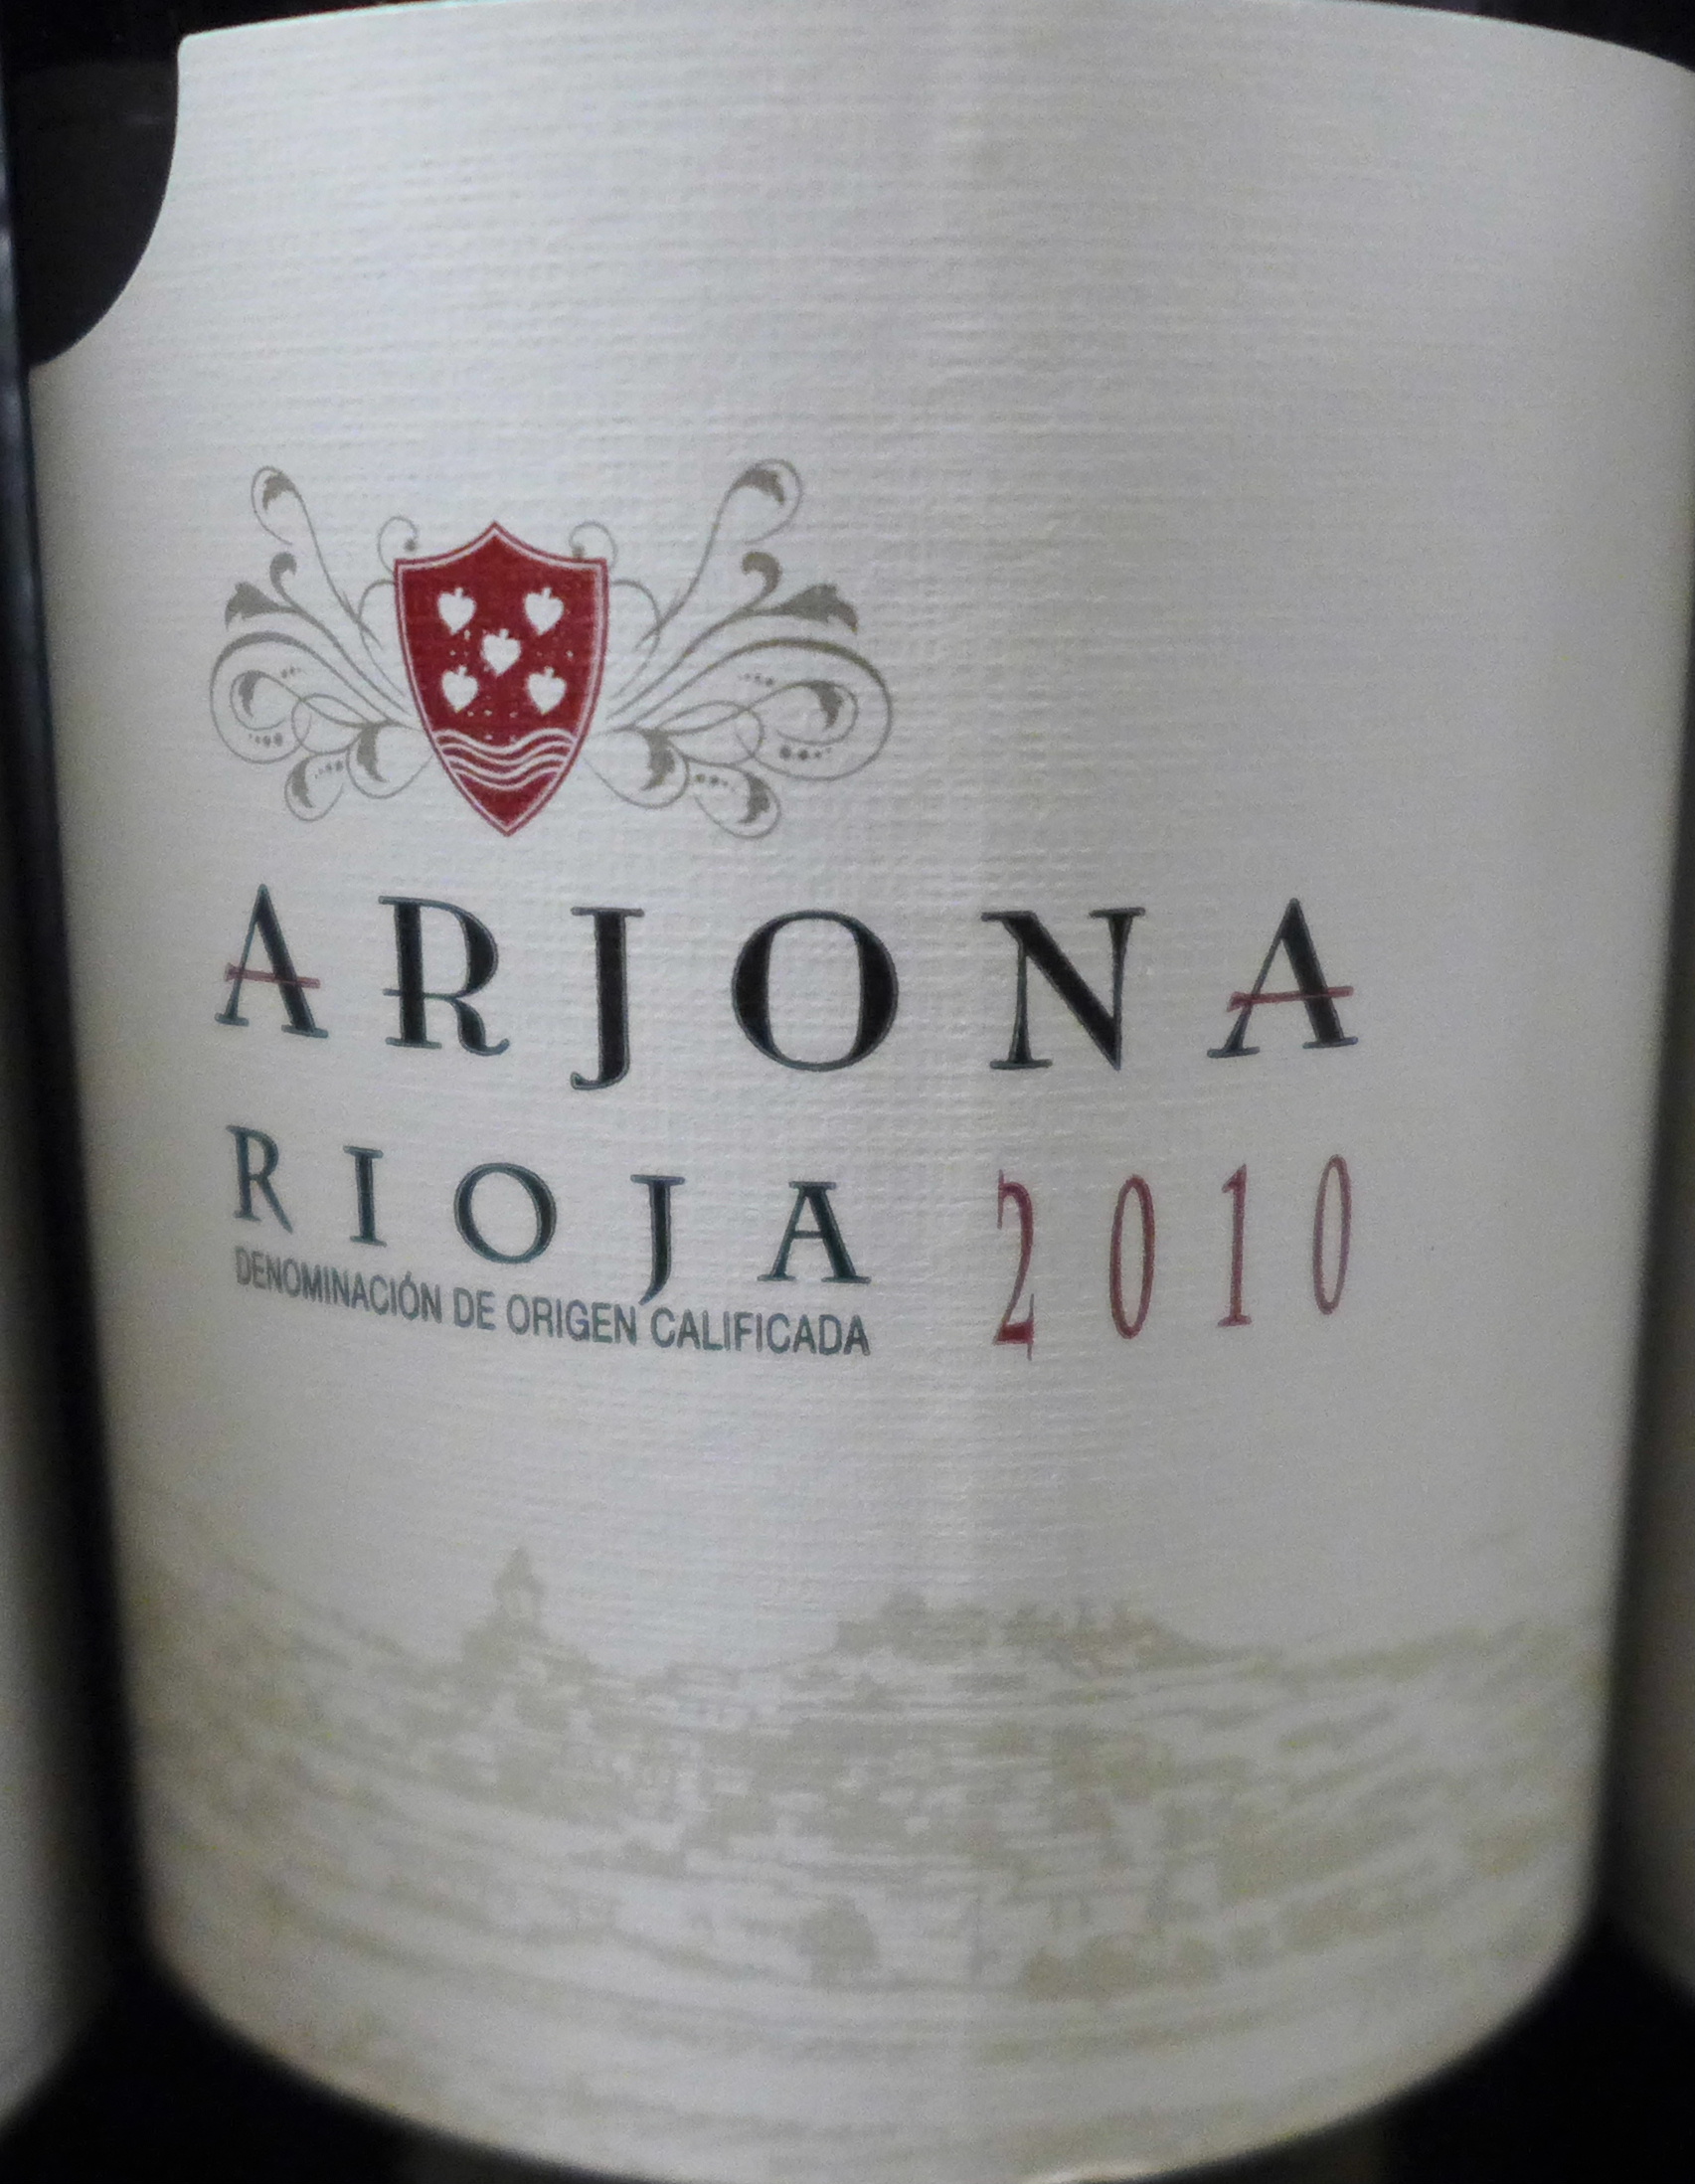 Five bottles of Rioja, two Monte Araya Selection Especial, 2010 and three Arjona 2010 - Image 3 of 4